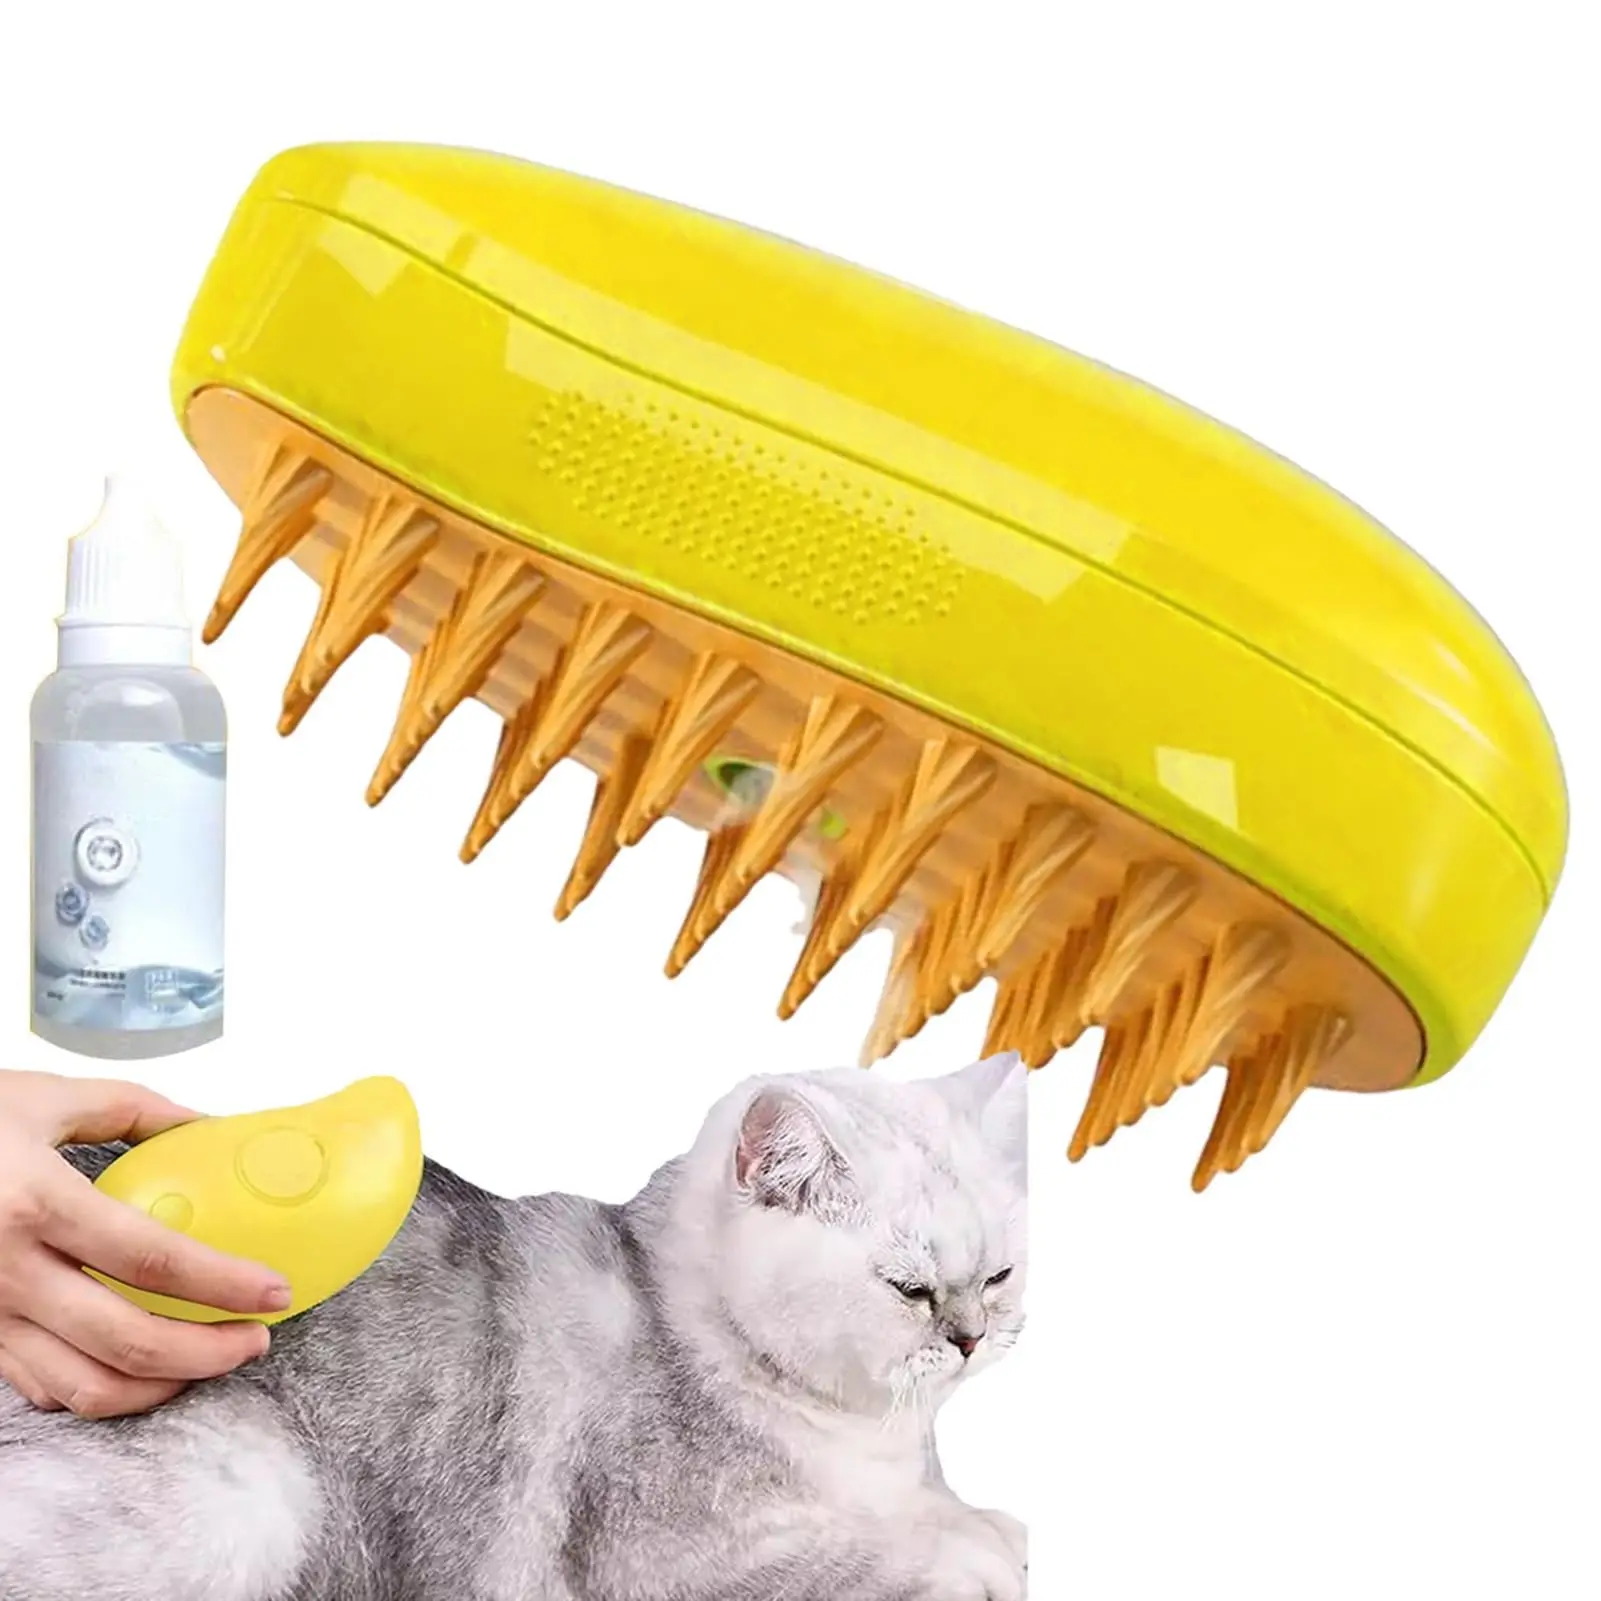 

Shedding Brush Pet Hair Remover Comb Hot Steam Massage Grooming Brush For Cats Dogs Pet Grooming supplies Pet Grooming Brush